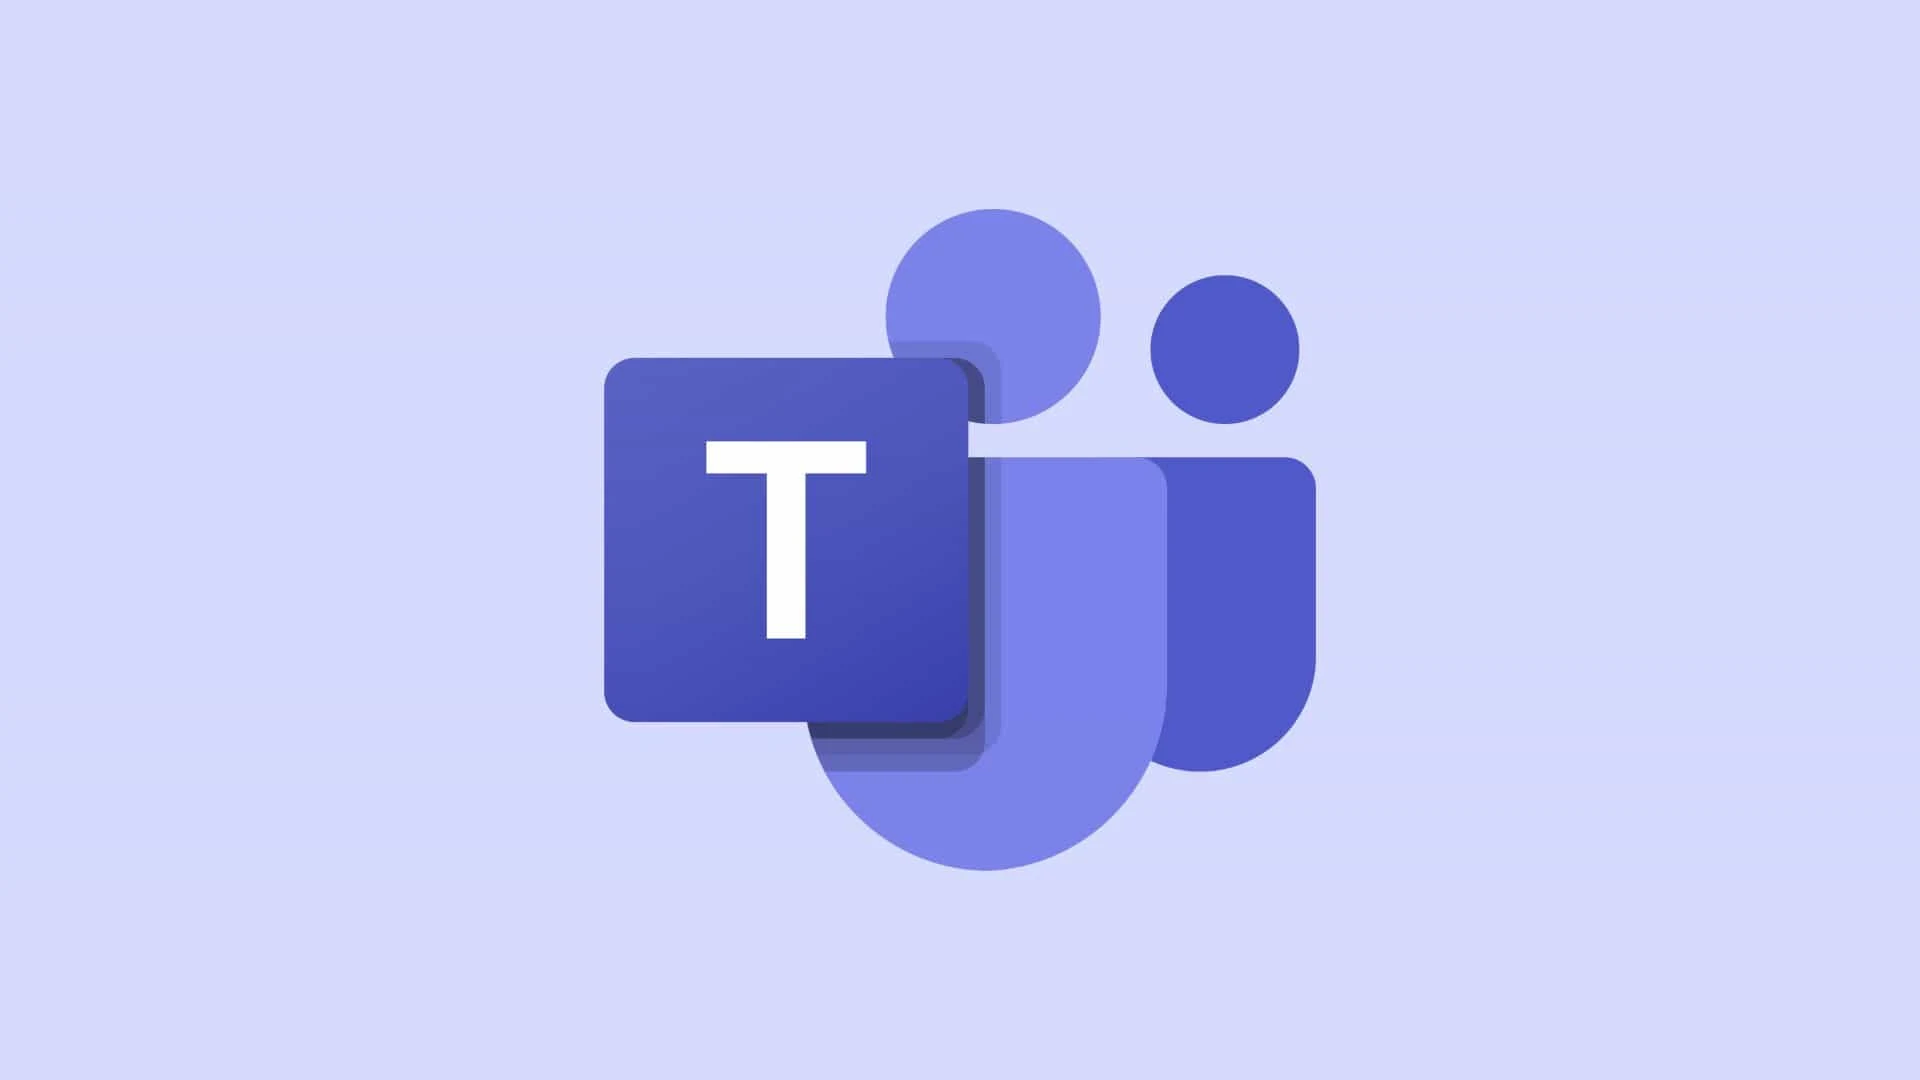 Introducing profanity filtering control and customization for captions in Microsoft Teams meetings